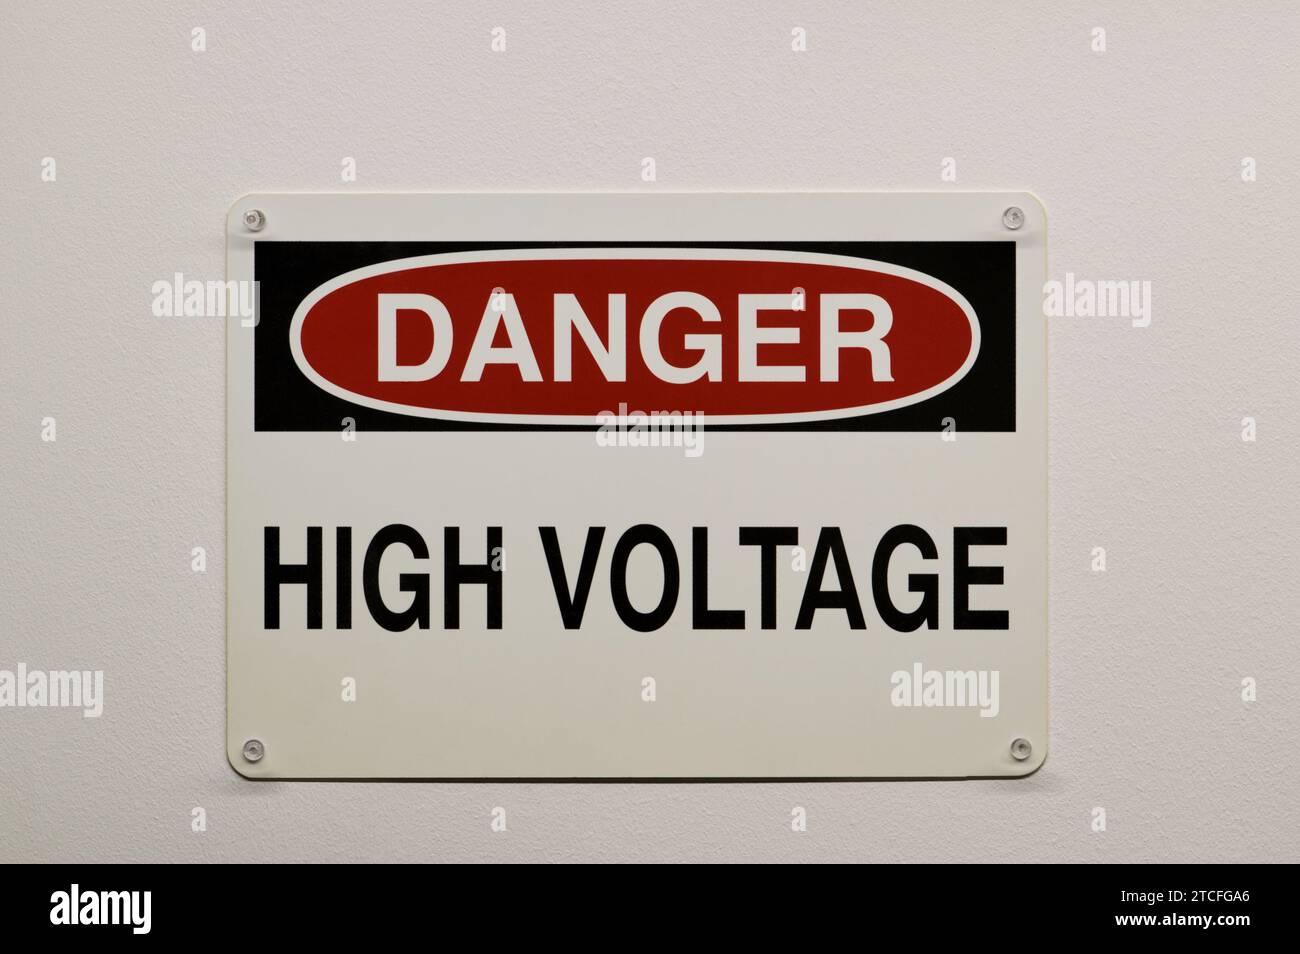 Danger High Voltage plastic warning sign isolated and attached to a white wall with push pins. Electricity safety concept. Stock Photo